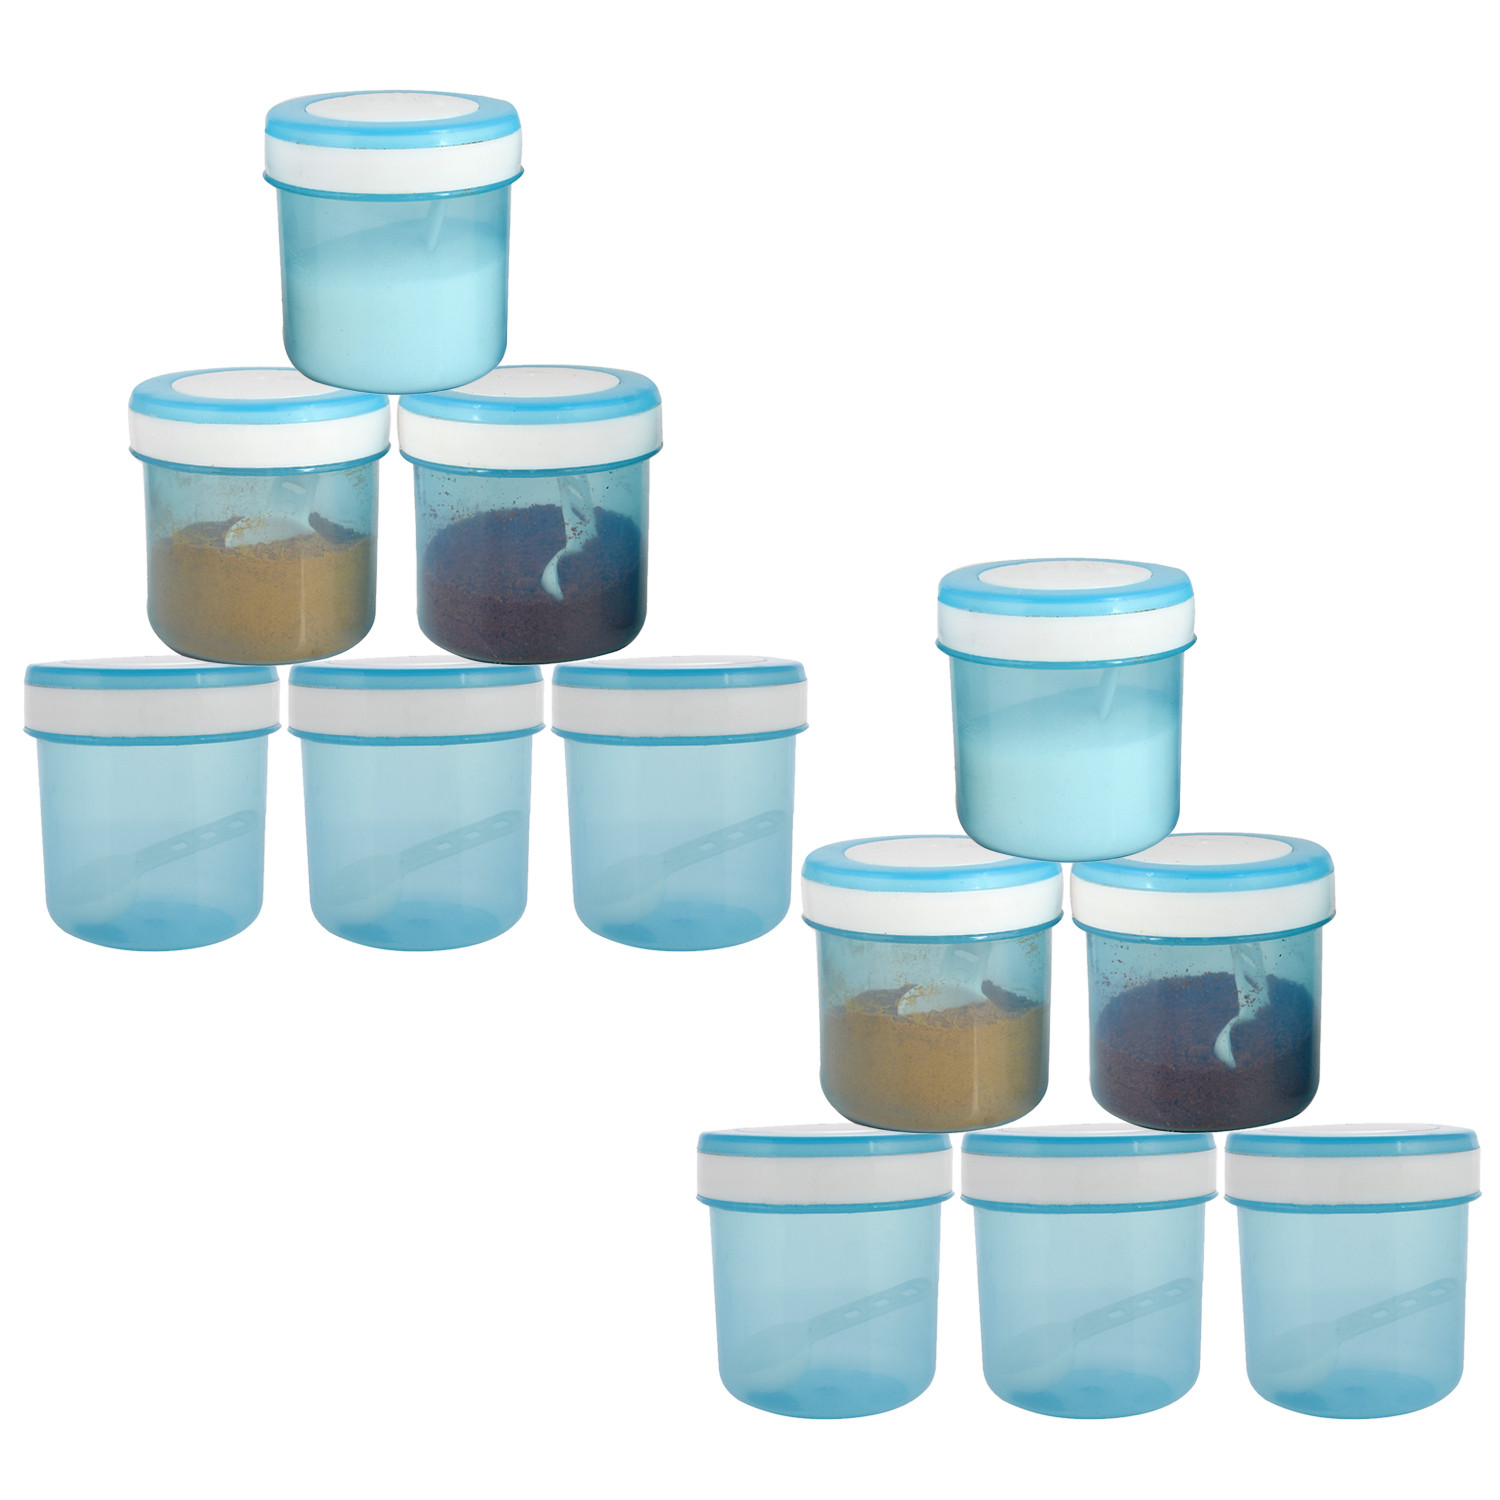 Kuber Industries Containers Set for Kitchen|BPA-Free Plastic Storage Containers Set|Kitchen Storage Containers|Grocery Containers with Spoon|SPICY 1100 ML| (Sky Blue)